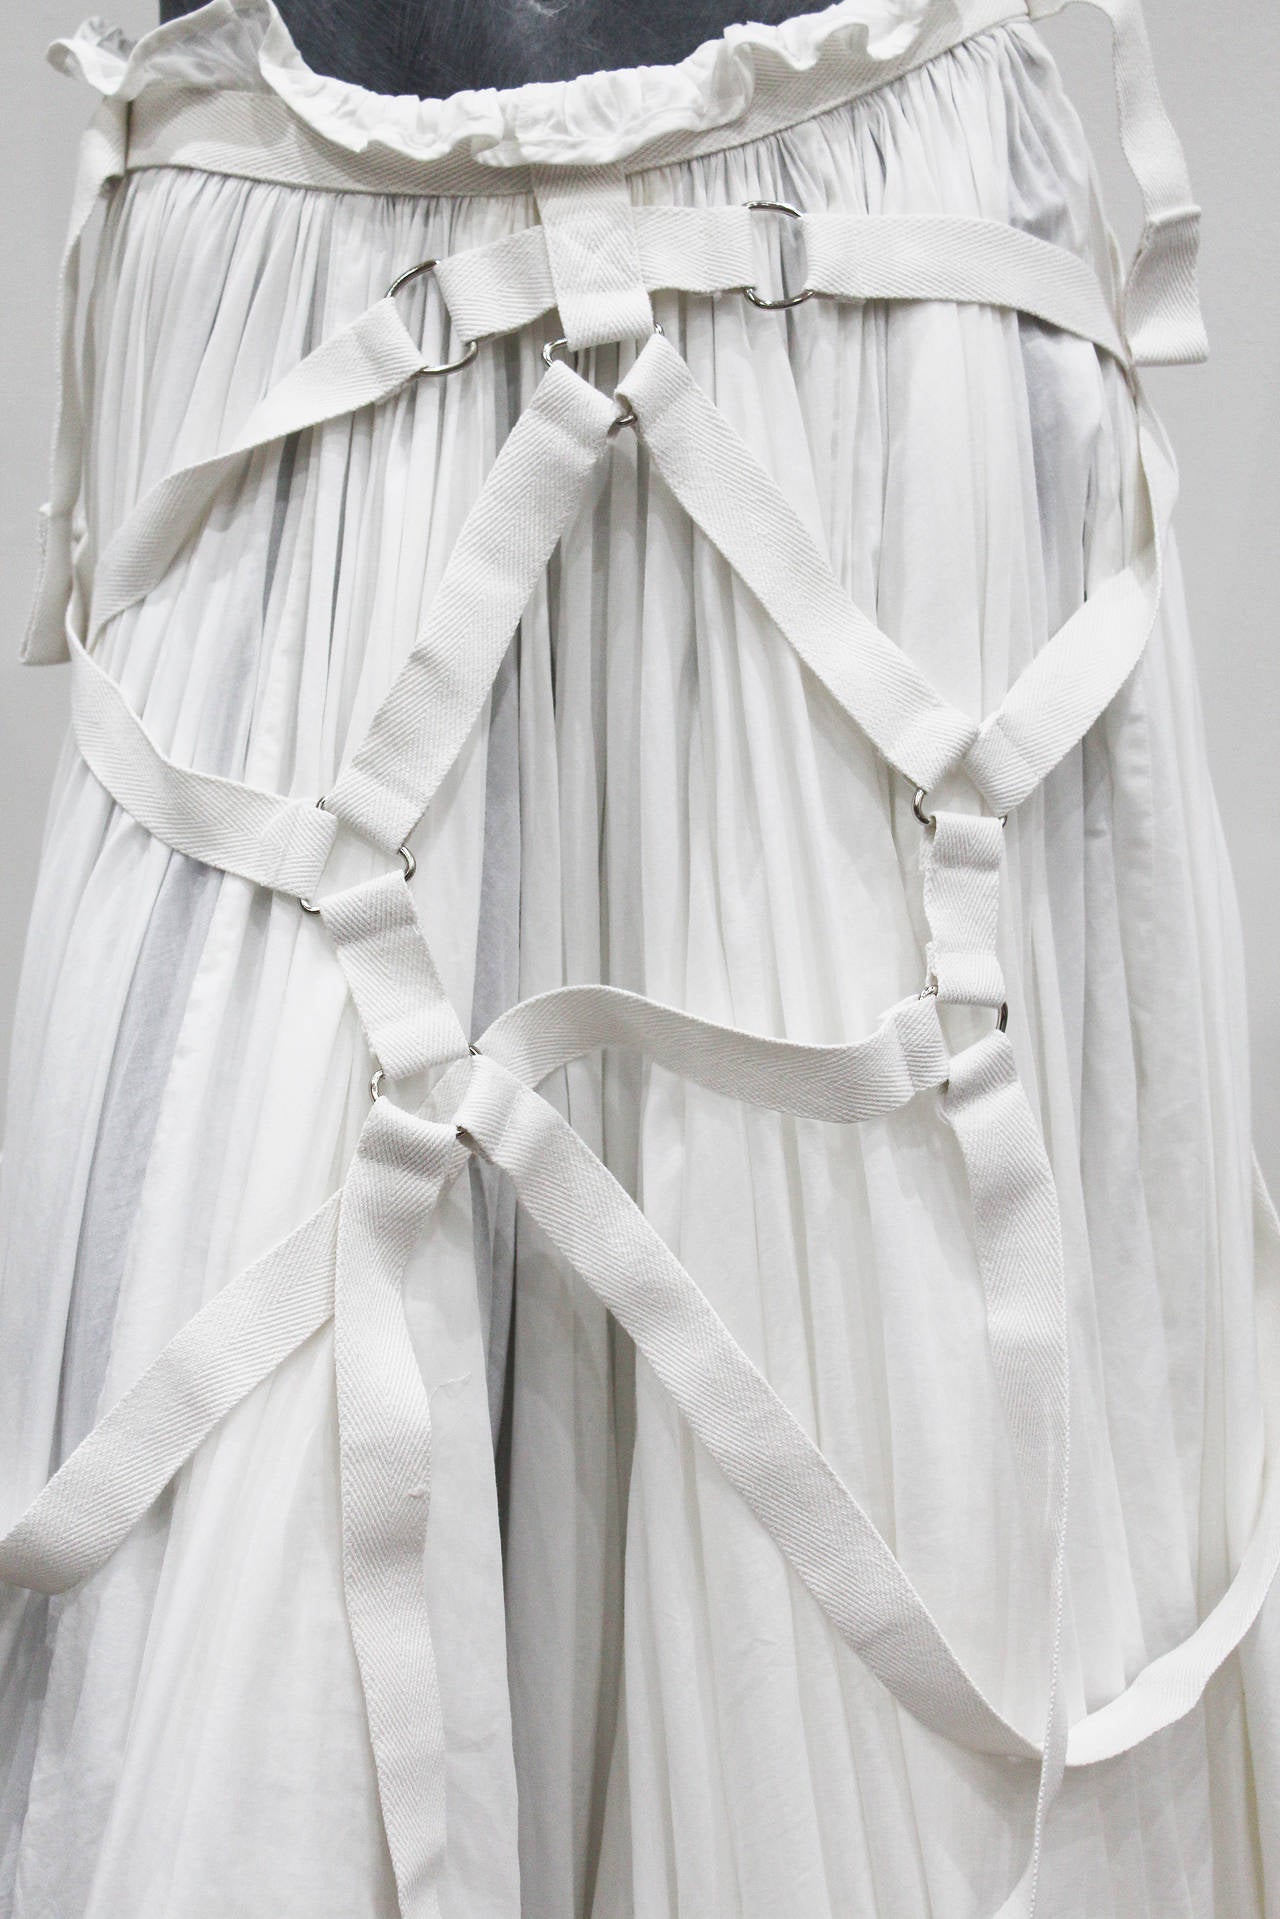 A white cotton full pleated layered skirt by Junya Watanabe for COMME des GARCONS. The skirt was first shown on the Paris runway for the Spring/Summer 2003 collection. The skirt is layered with masses of white cotton and is caged with bondage